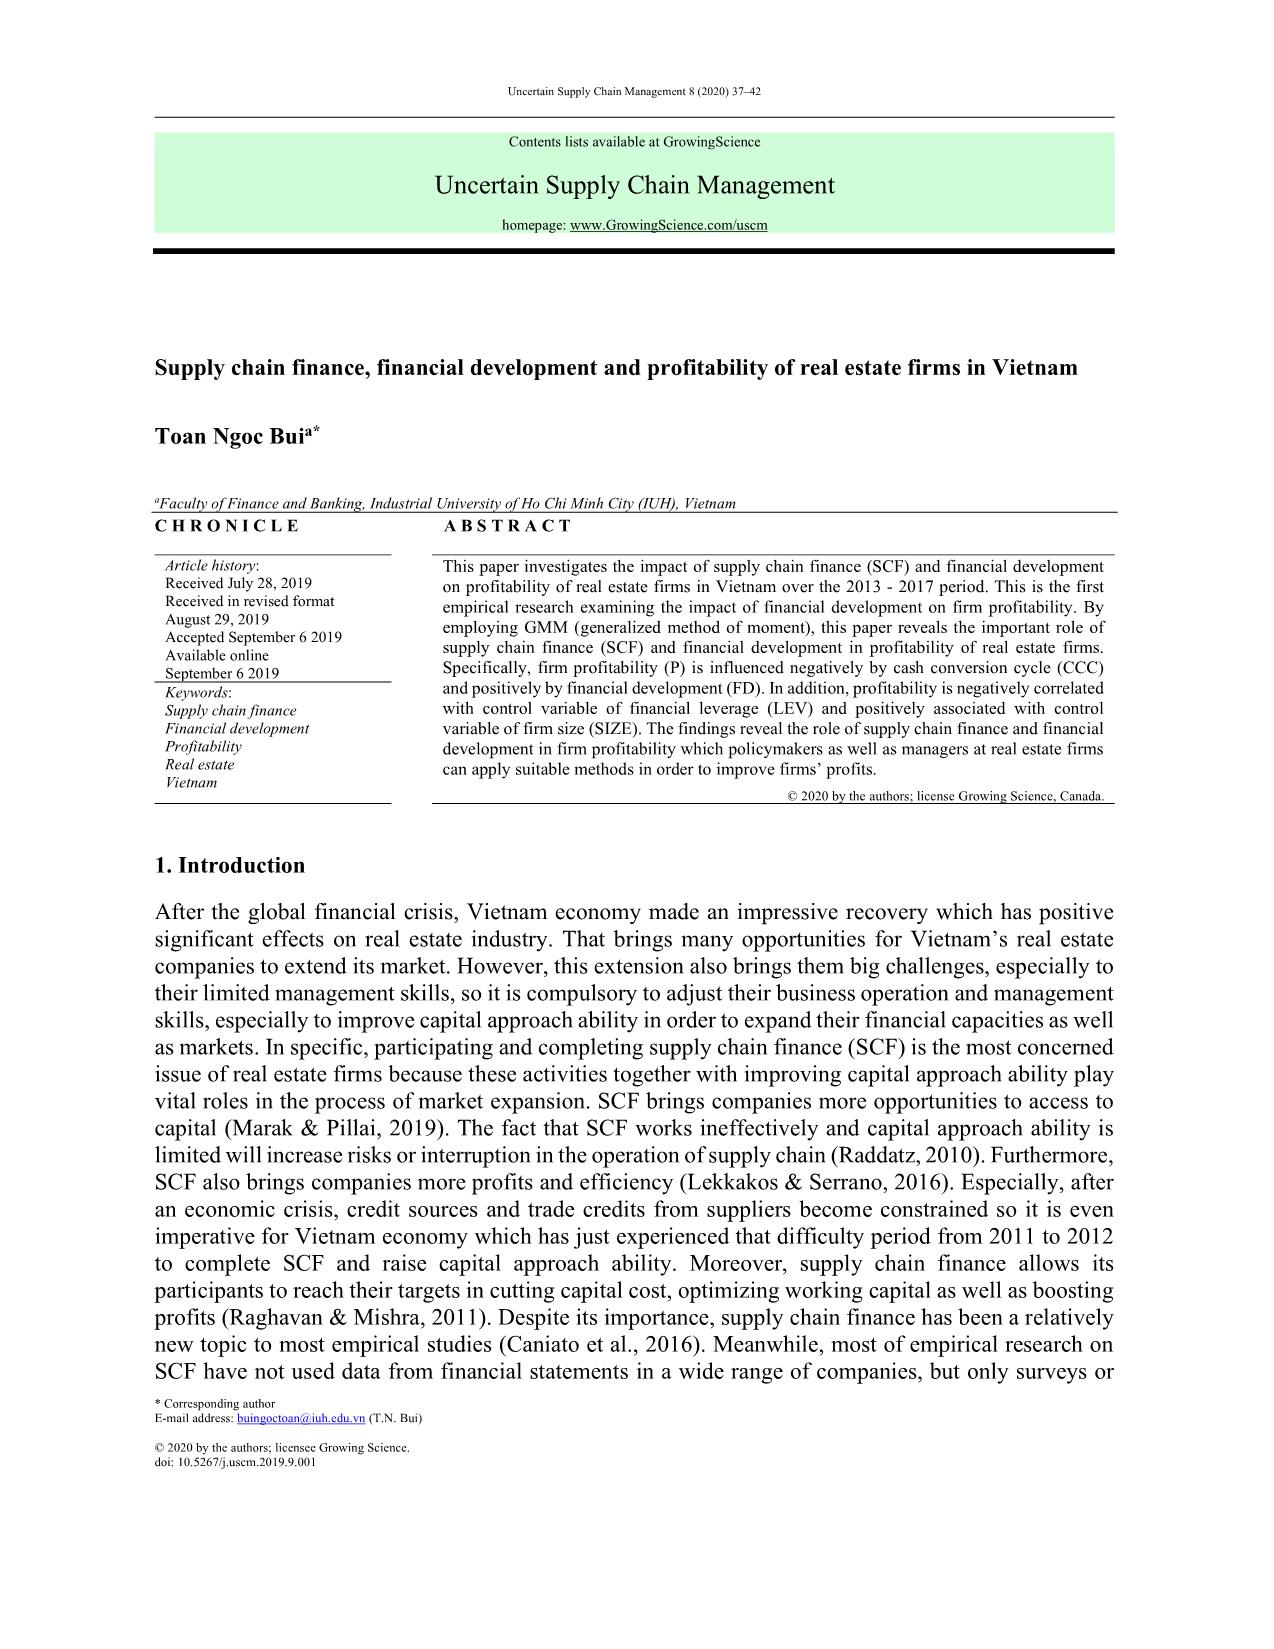 Supply chain finance, financial development and profitability of real estate firms in Vietnam trang 1